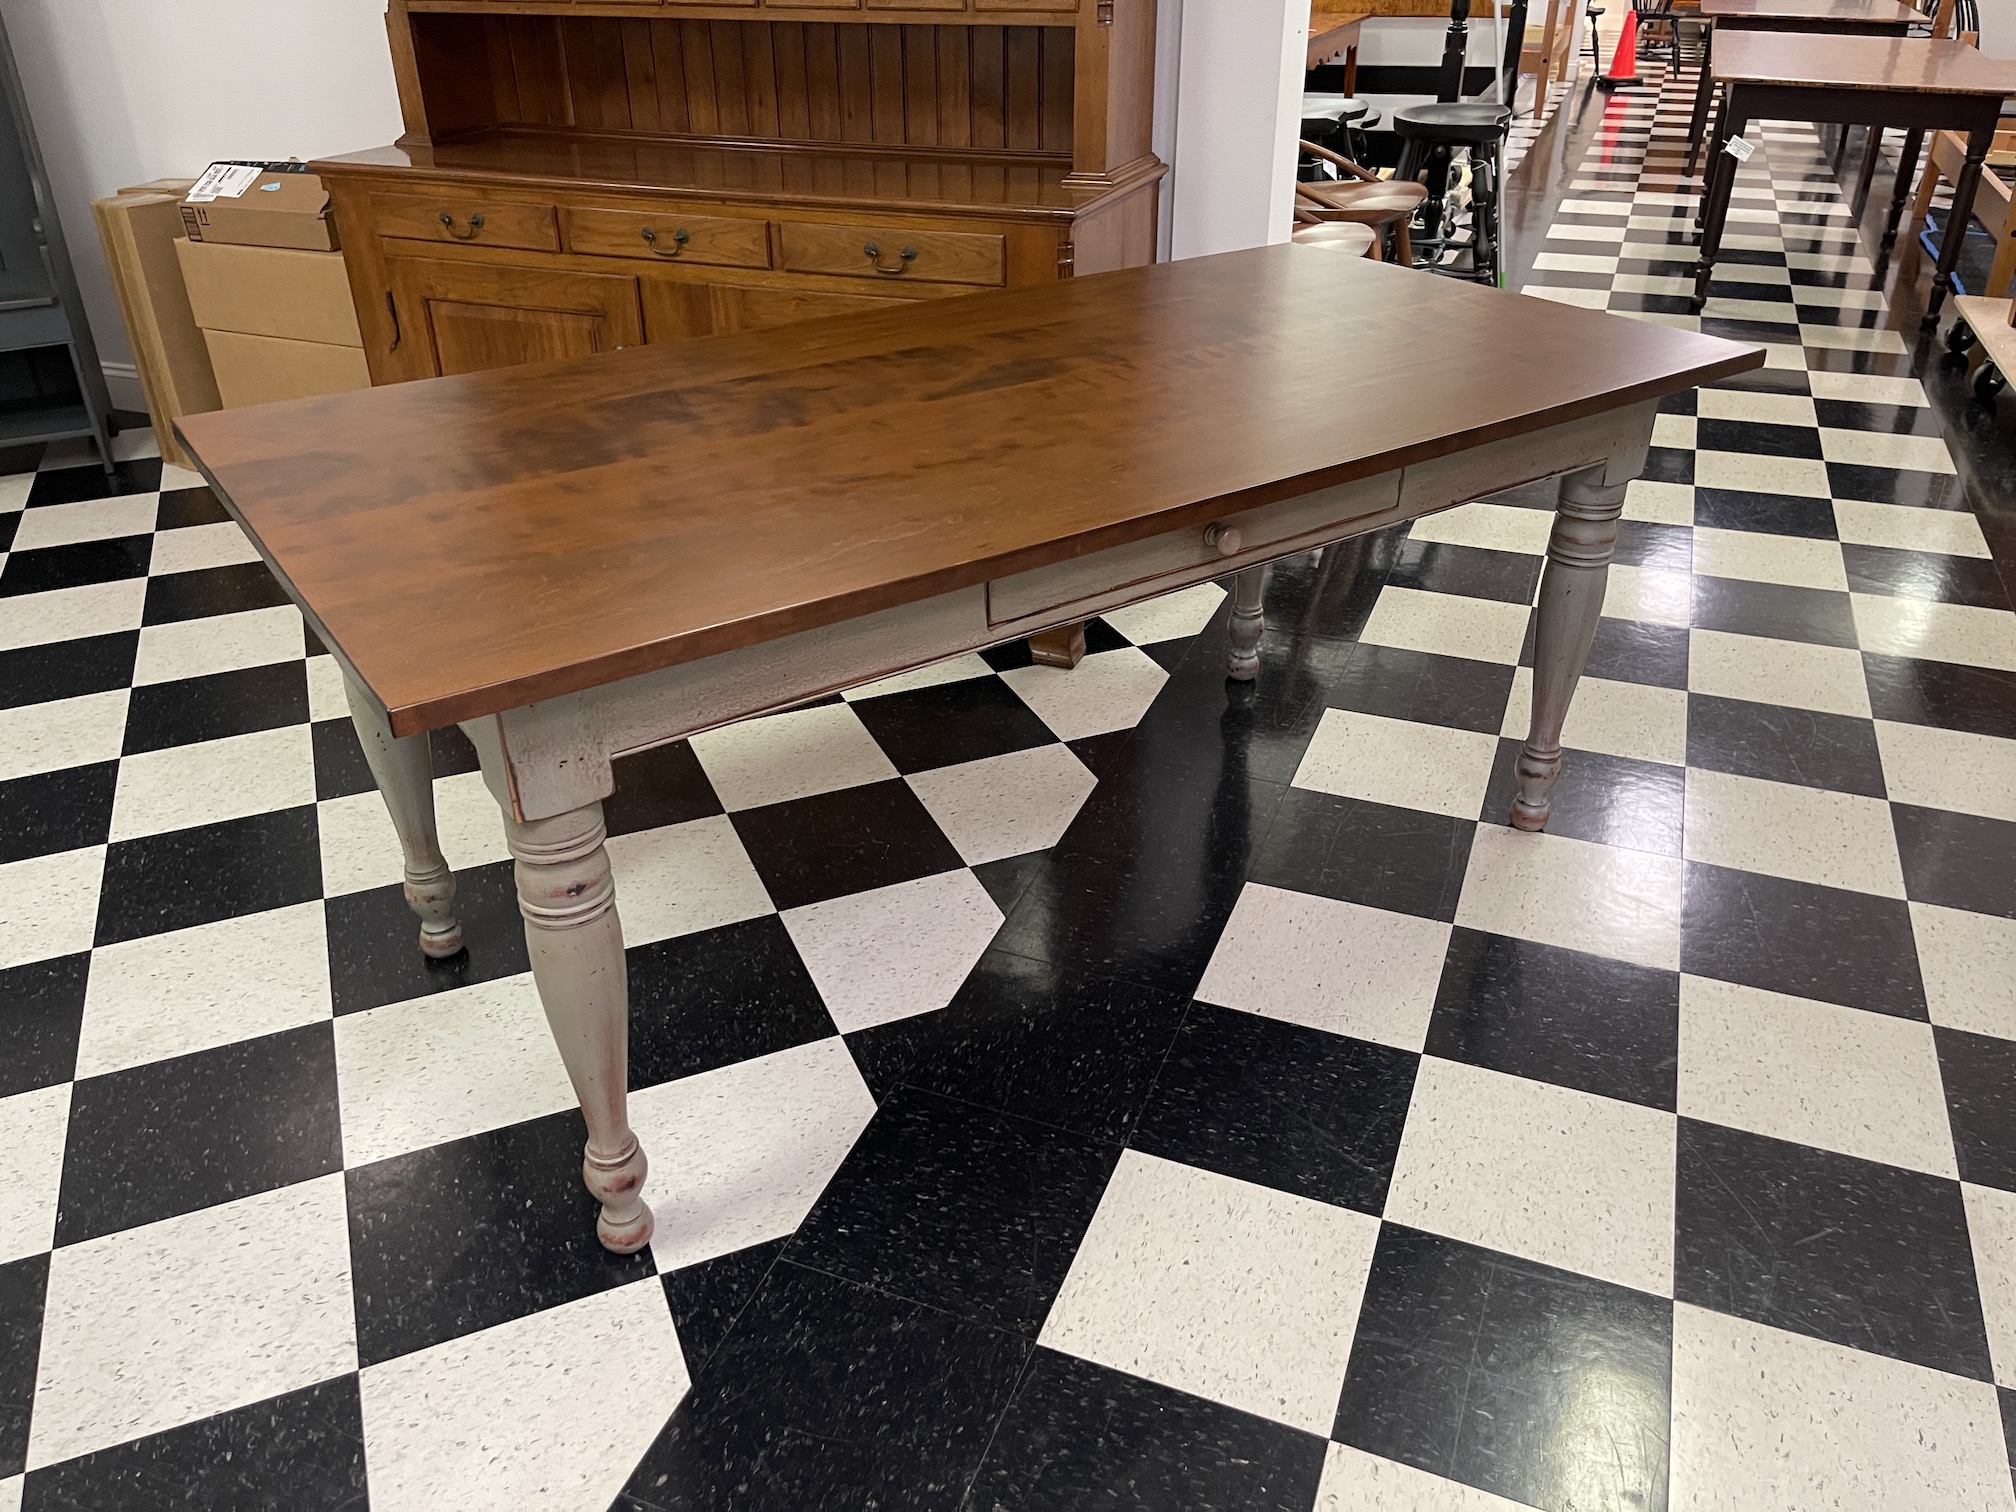 6ft X 36in New Model Turned Leg Farm Table - Cherry Wood Top - Painted Base Image